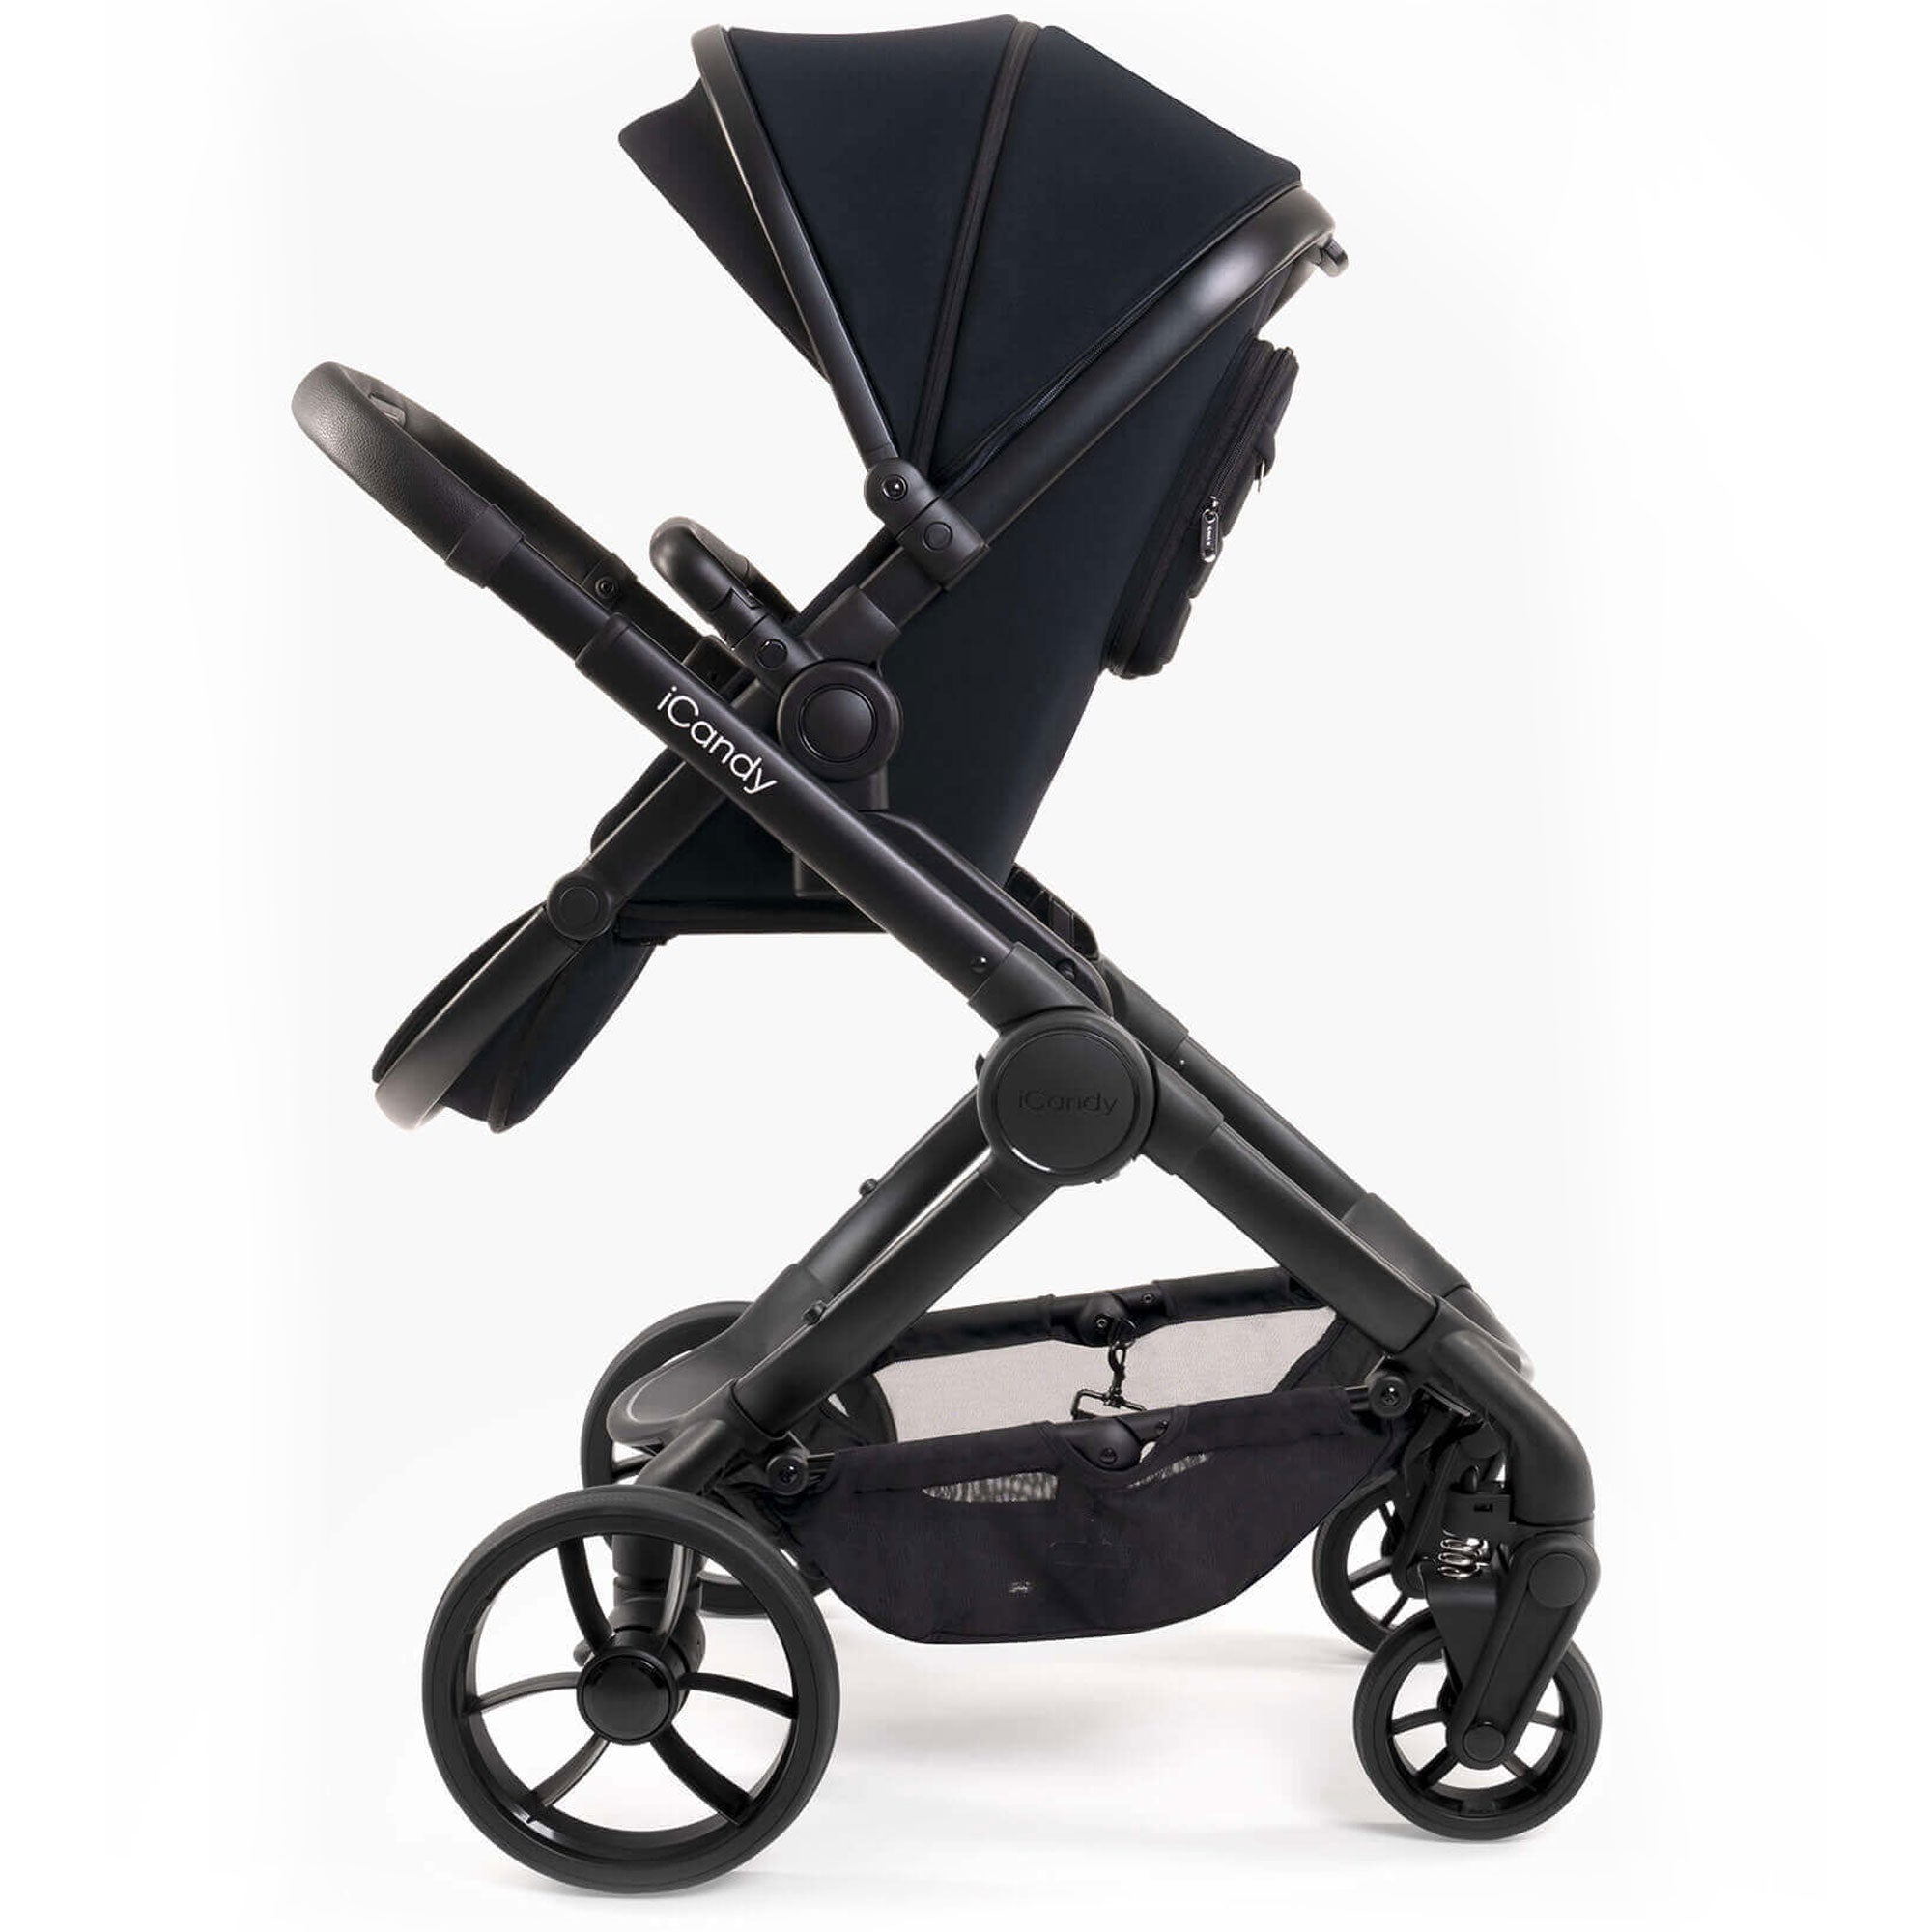 iCandy Peach 7 Complete Bundle with COCOON Car Seat in Black